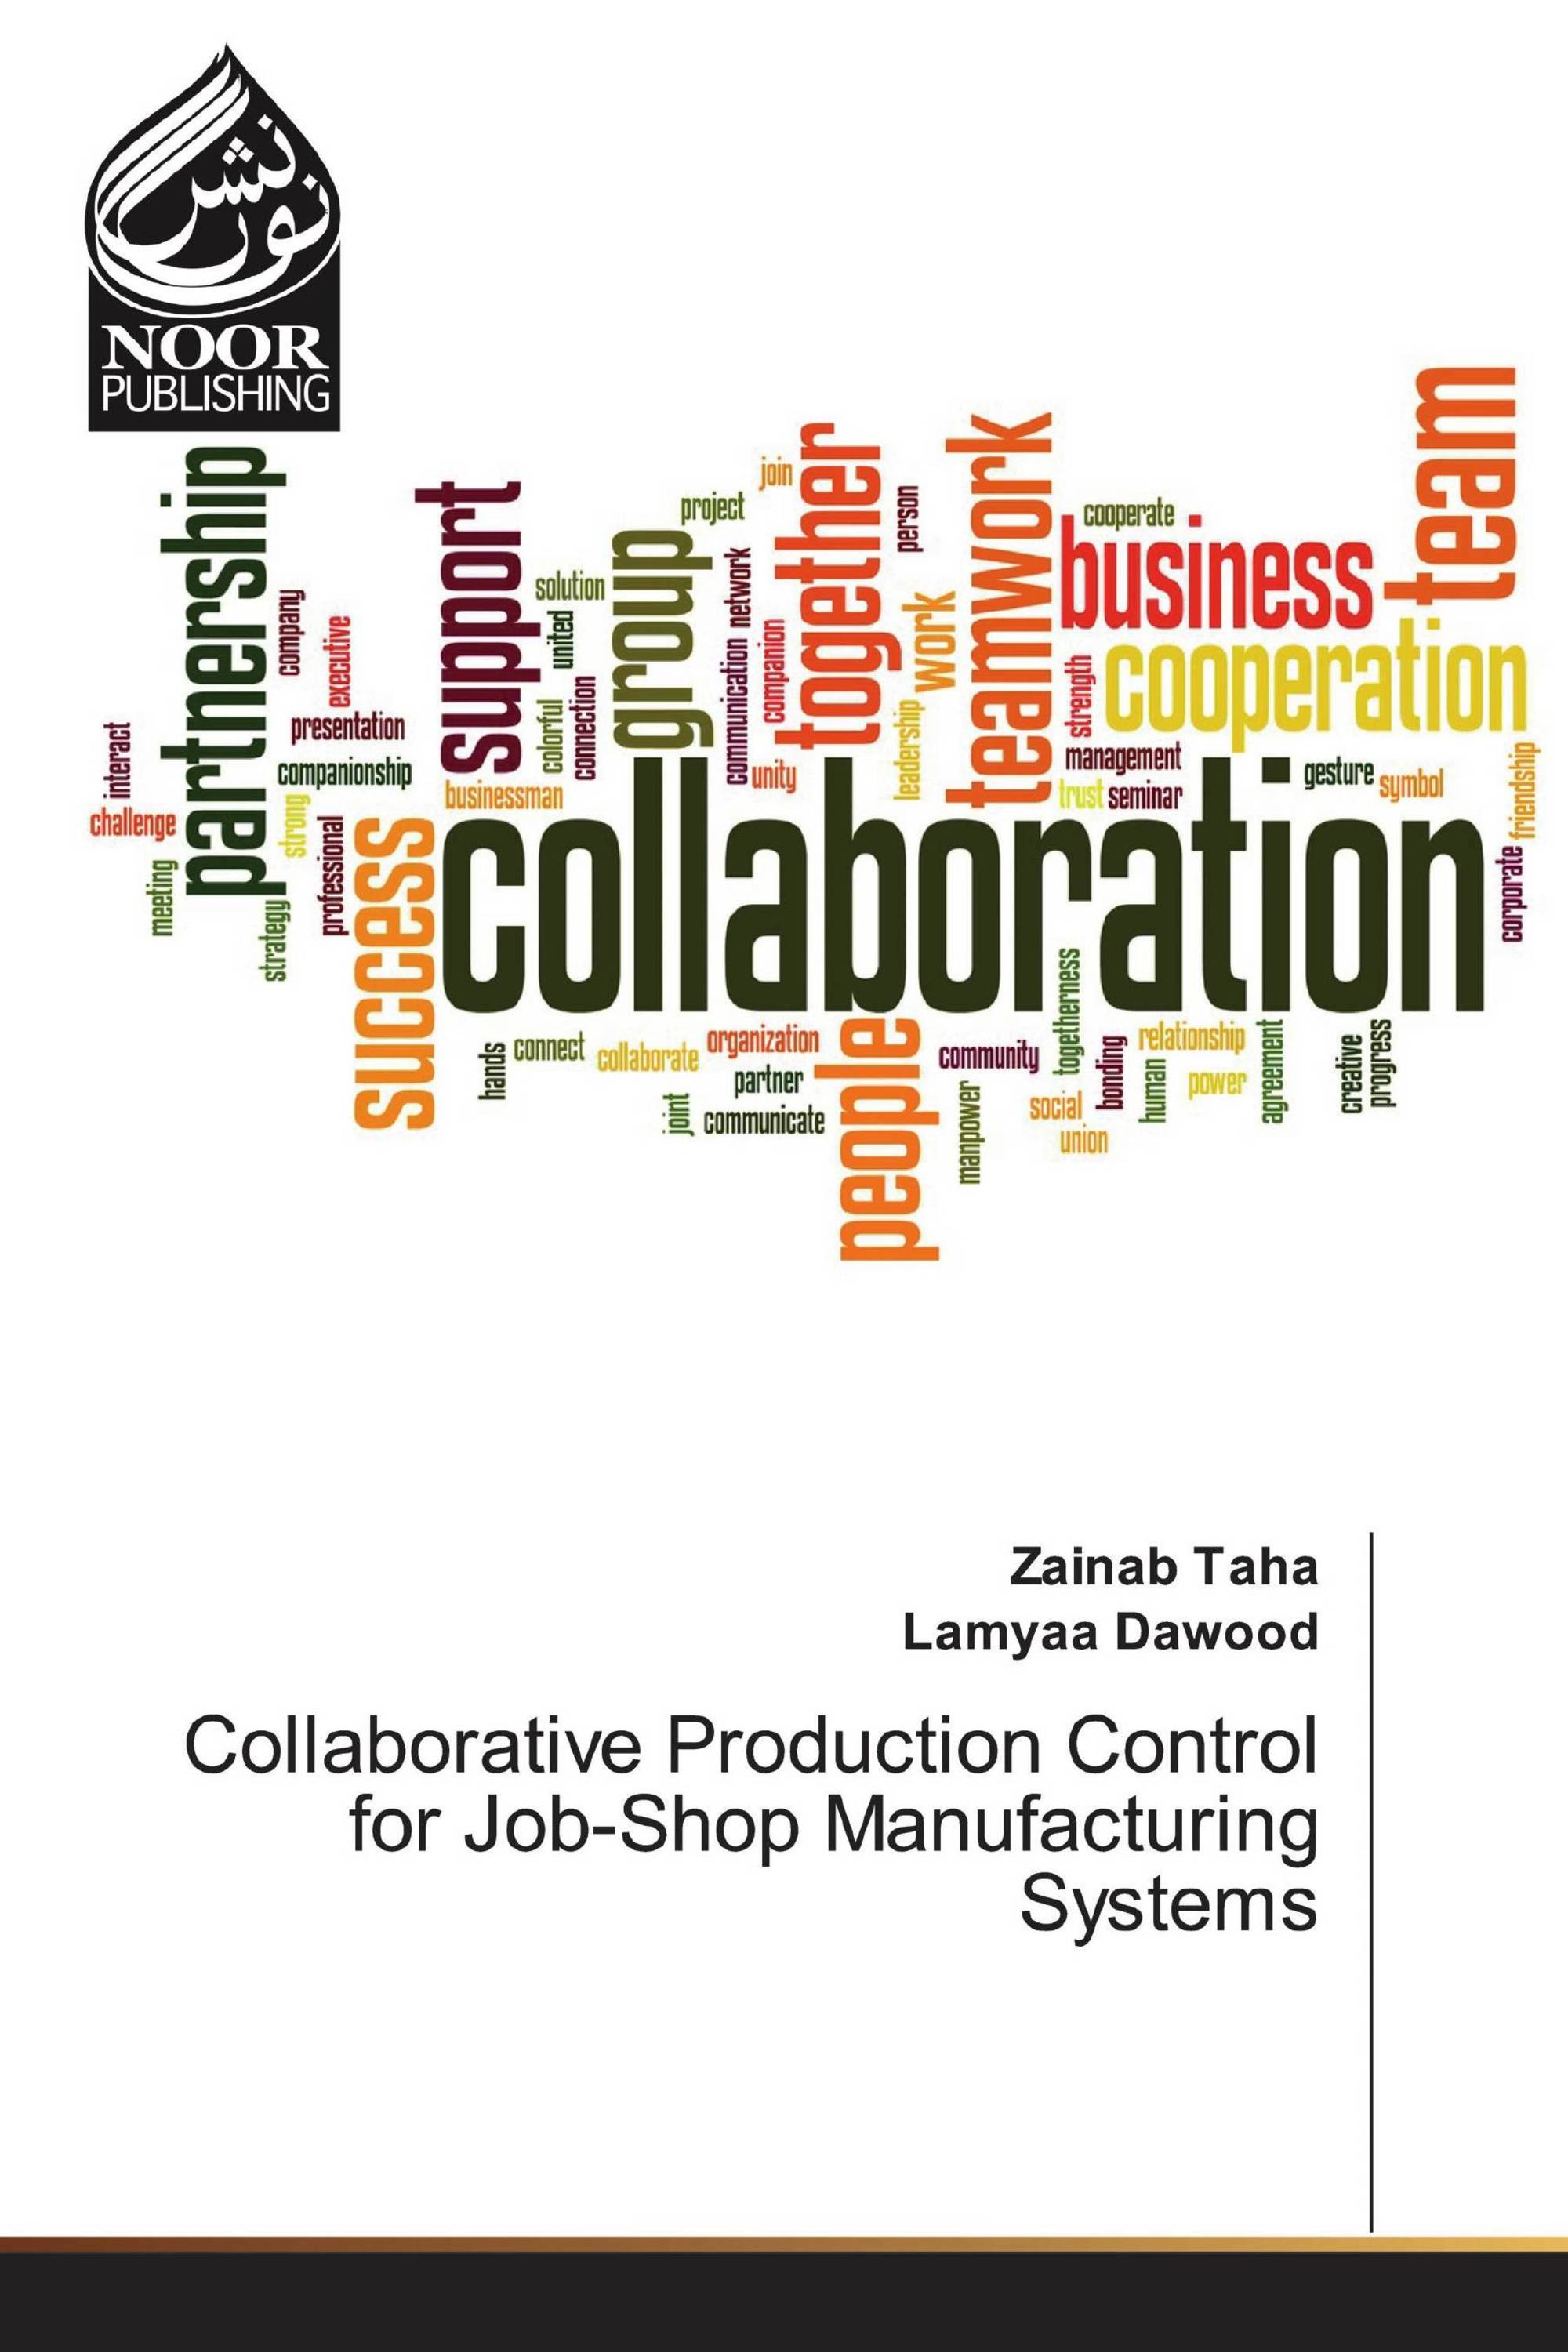 Collaborative Production Control for Job-Shop Manufacturing Systems